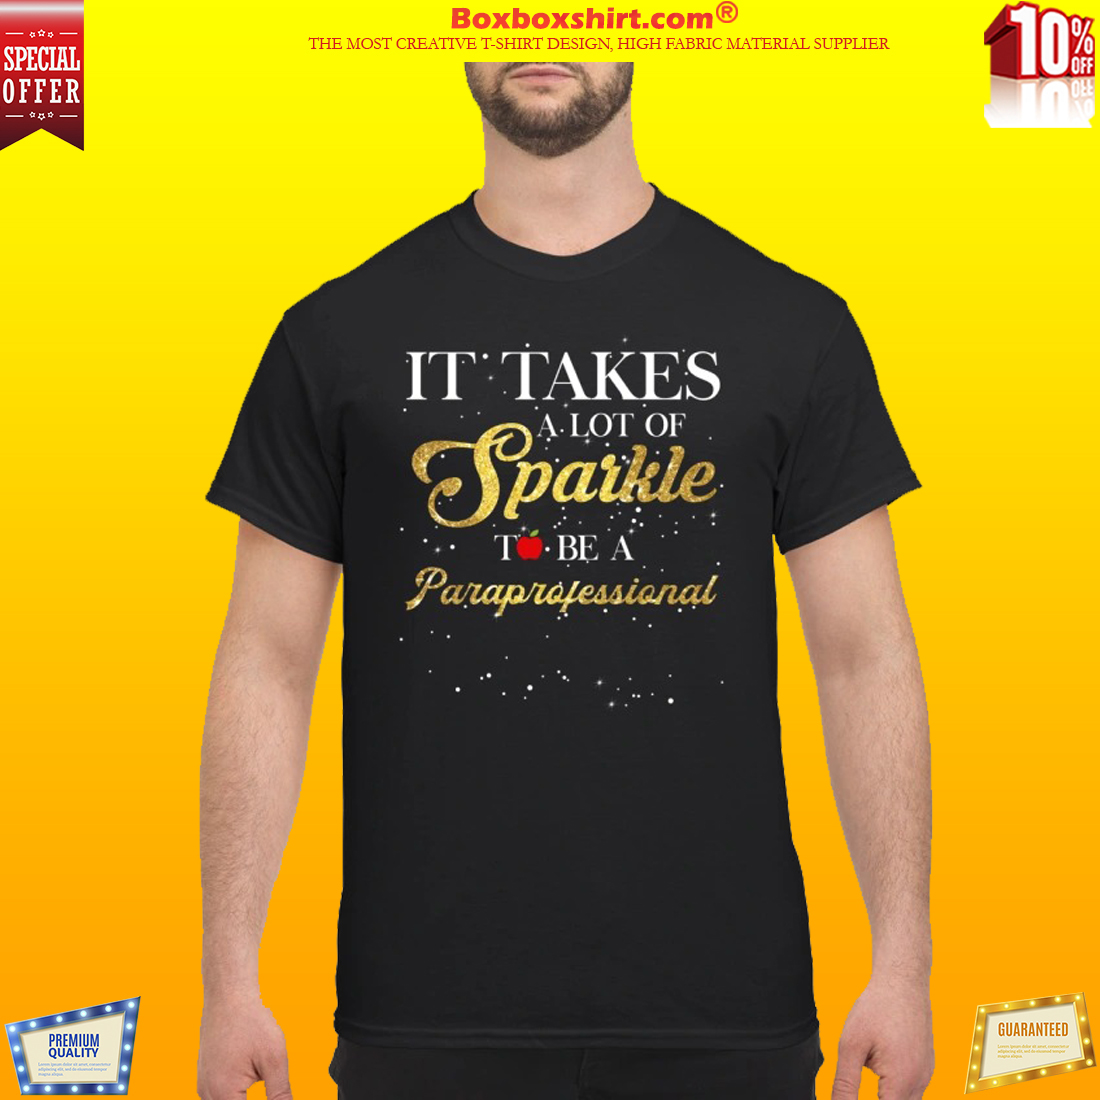 [10% OFF] It takes a lot of sparkle to be a paraprofessional shirt